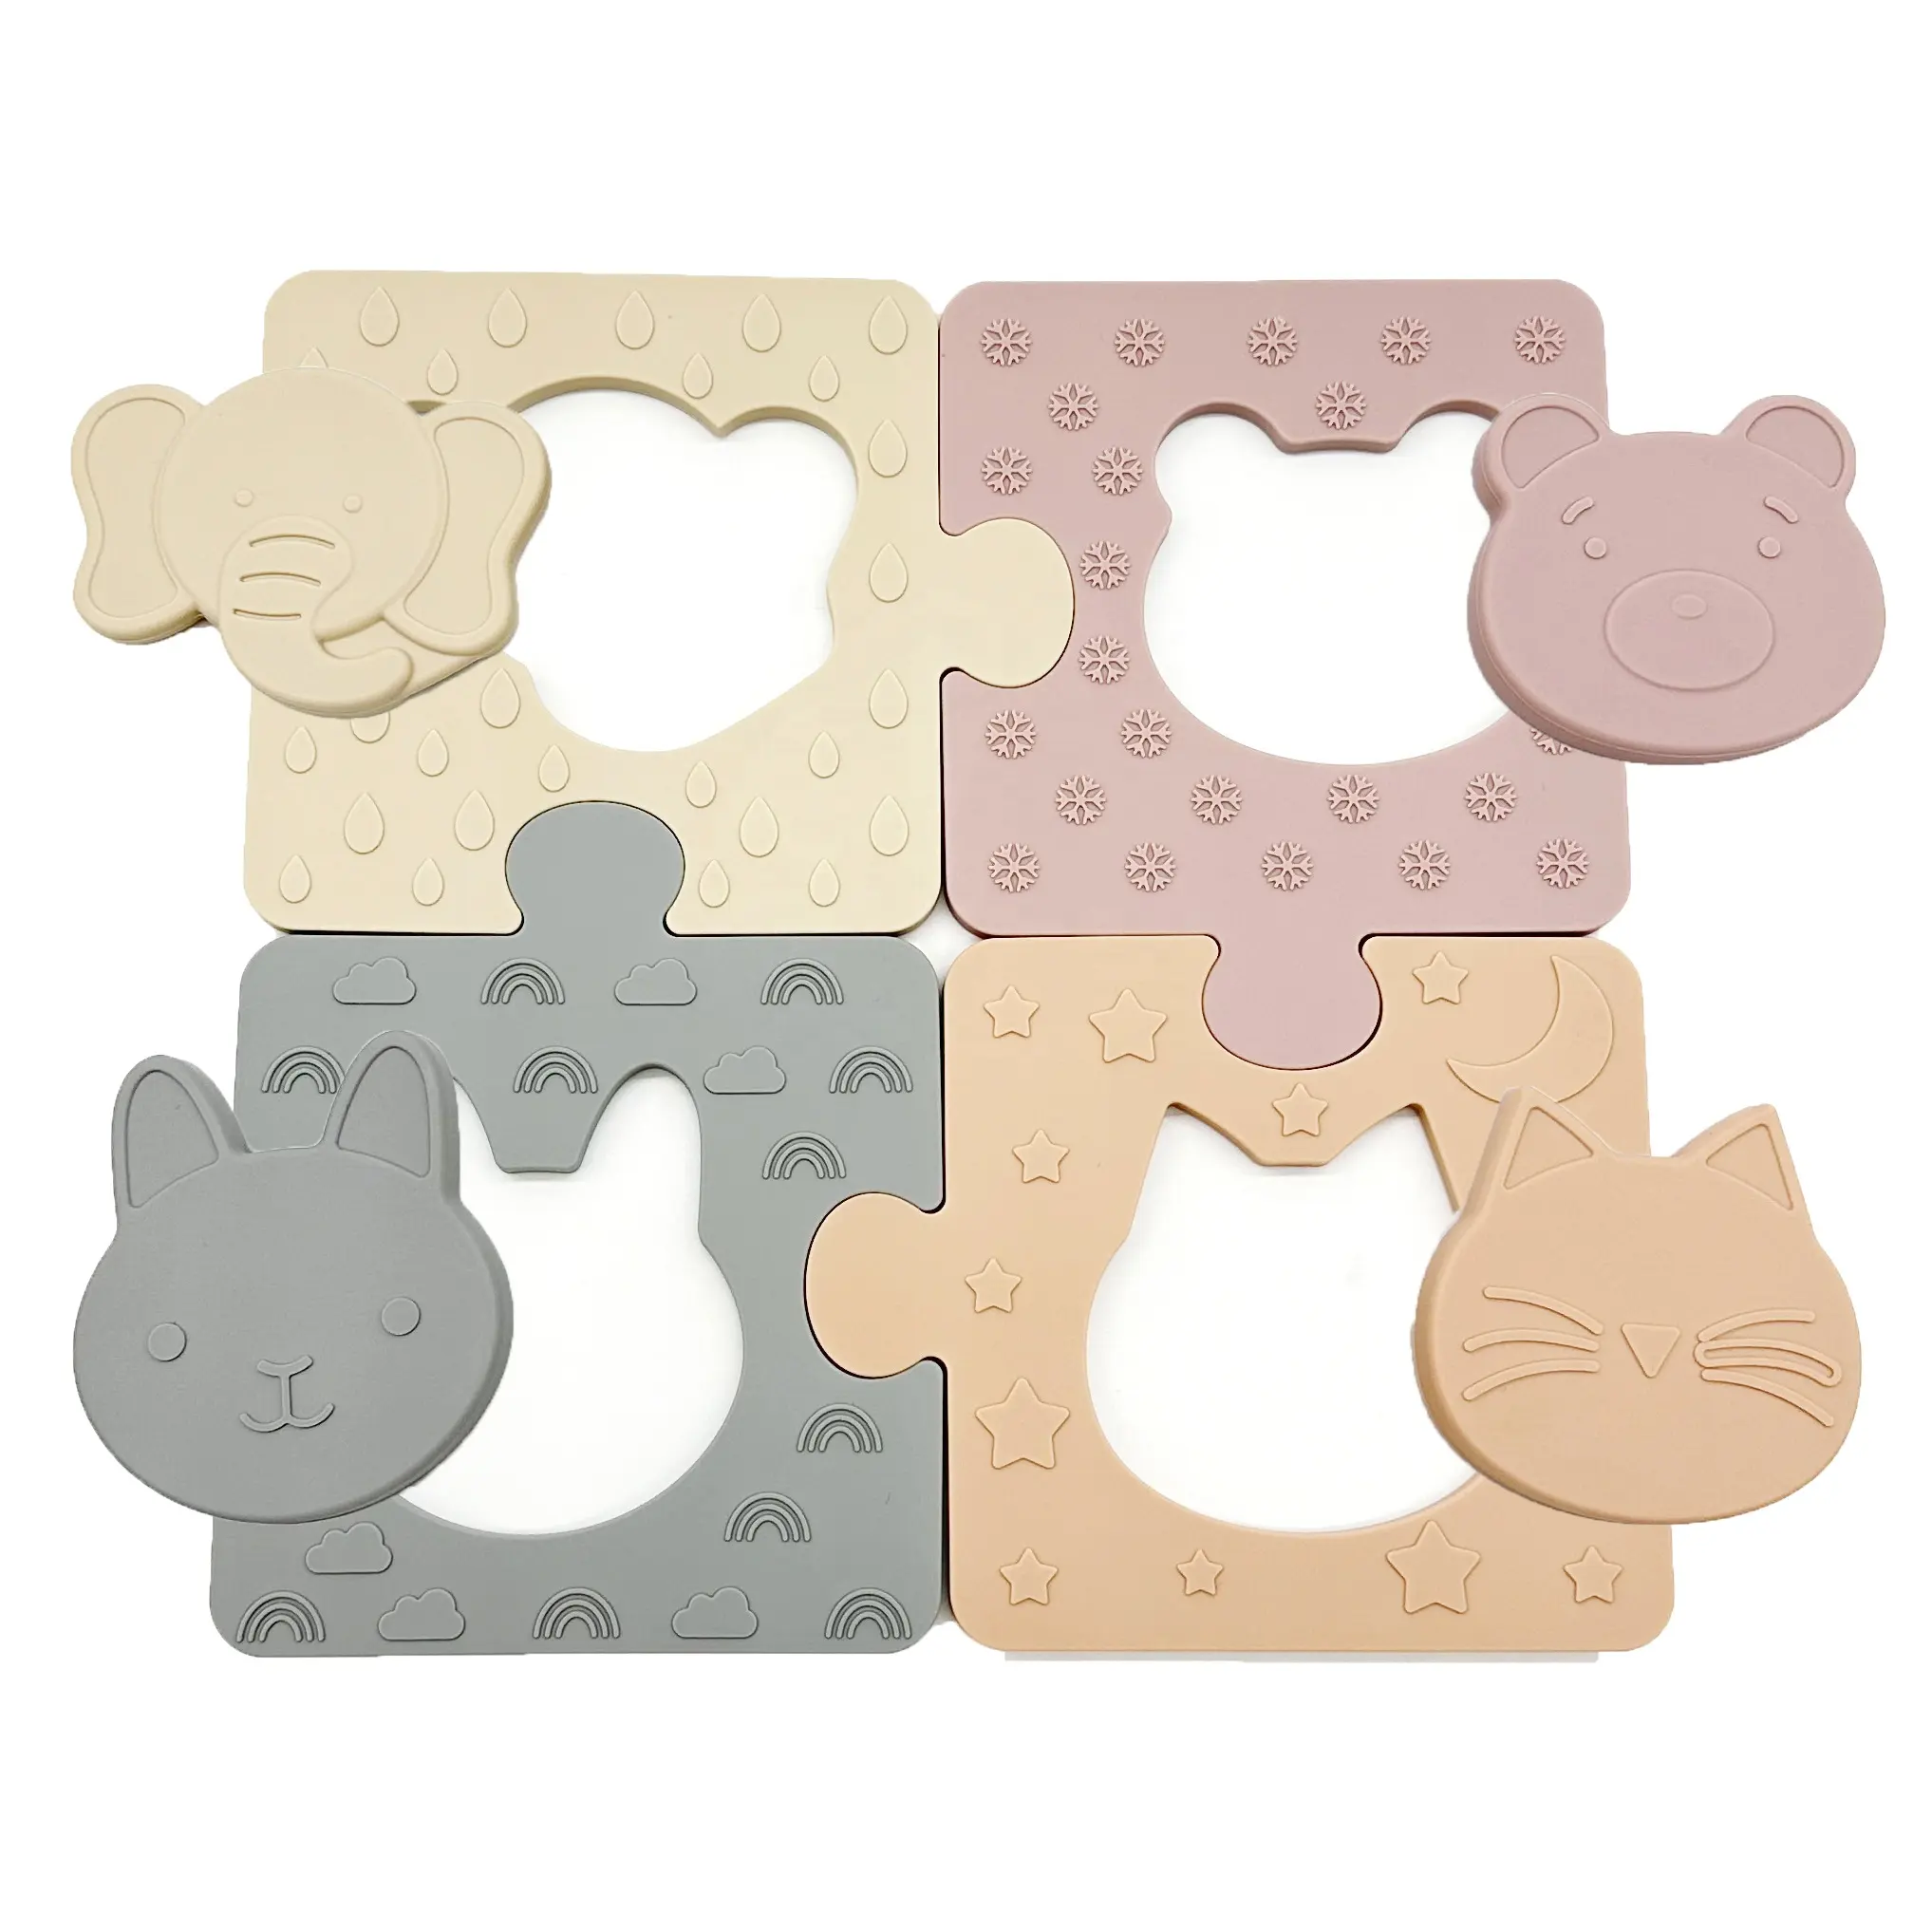 New Arrival Eco Friendly Silicone Puzzles Baby Soft Mesting Sorting Puzzle Play Set for Kids